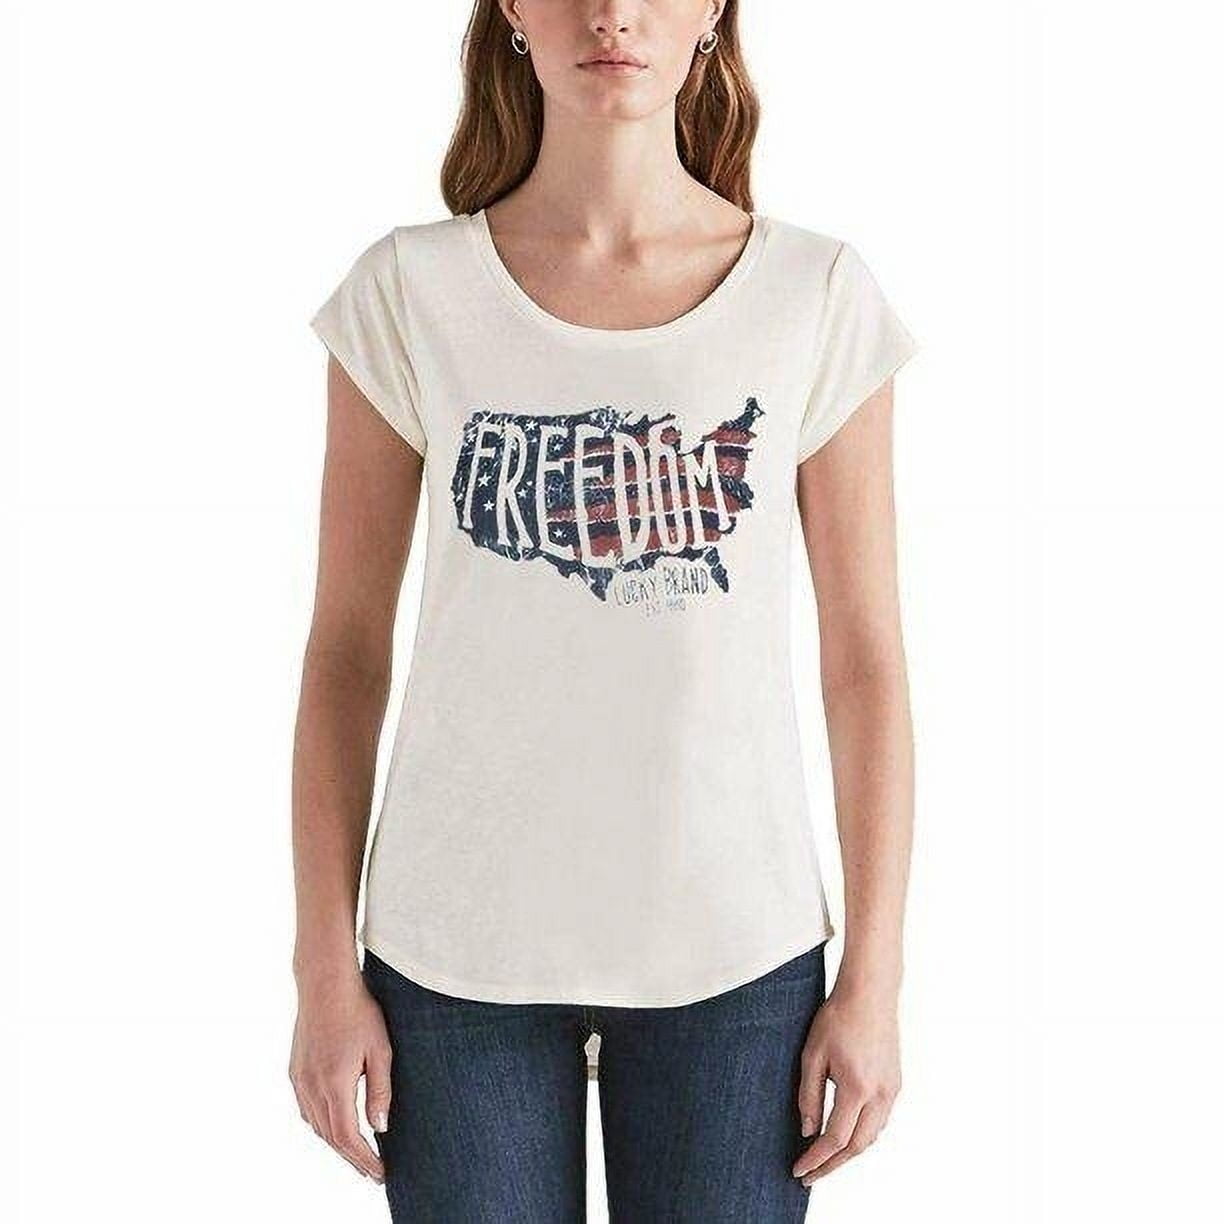 Lucky Brand Women's Graphic Tee, Freedom White, XL New with box